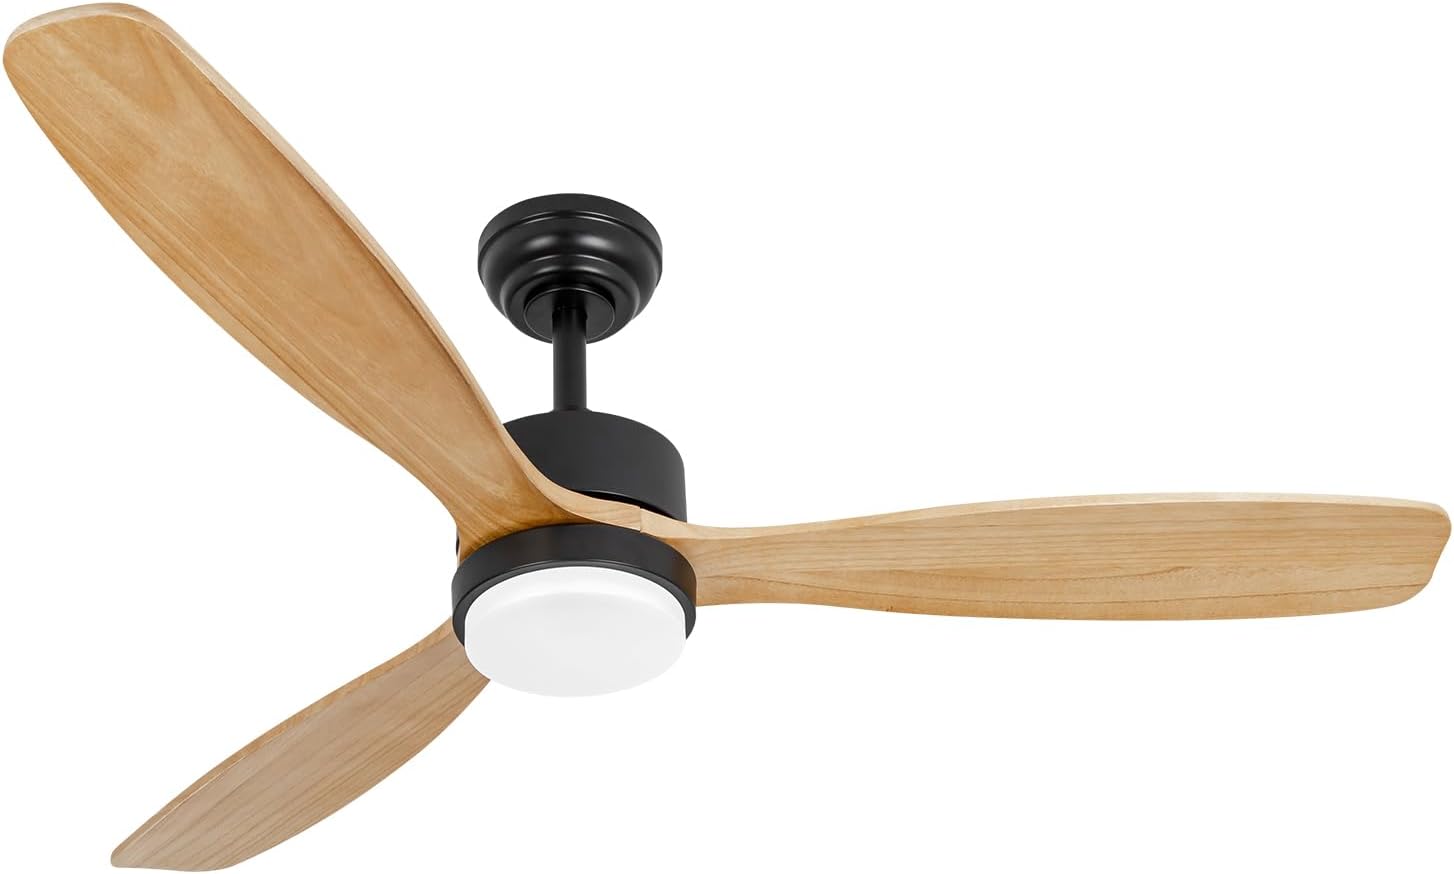 52In Ceiling Fan,Wood Ceiling Fans with Lights and Remote22W LED Light Modern Ceiling Fan with Lights,3 Natural Solid Wood Blades,6 Speeds,Reversible Quiet DC Motor(Matte Black)